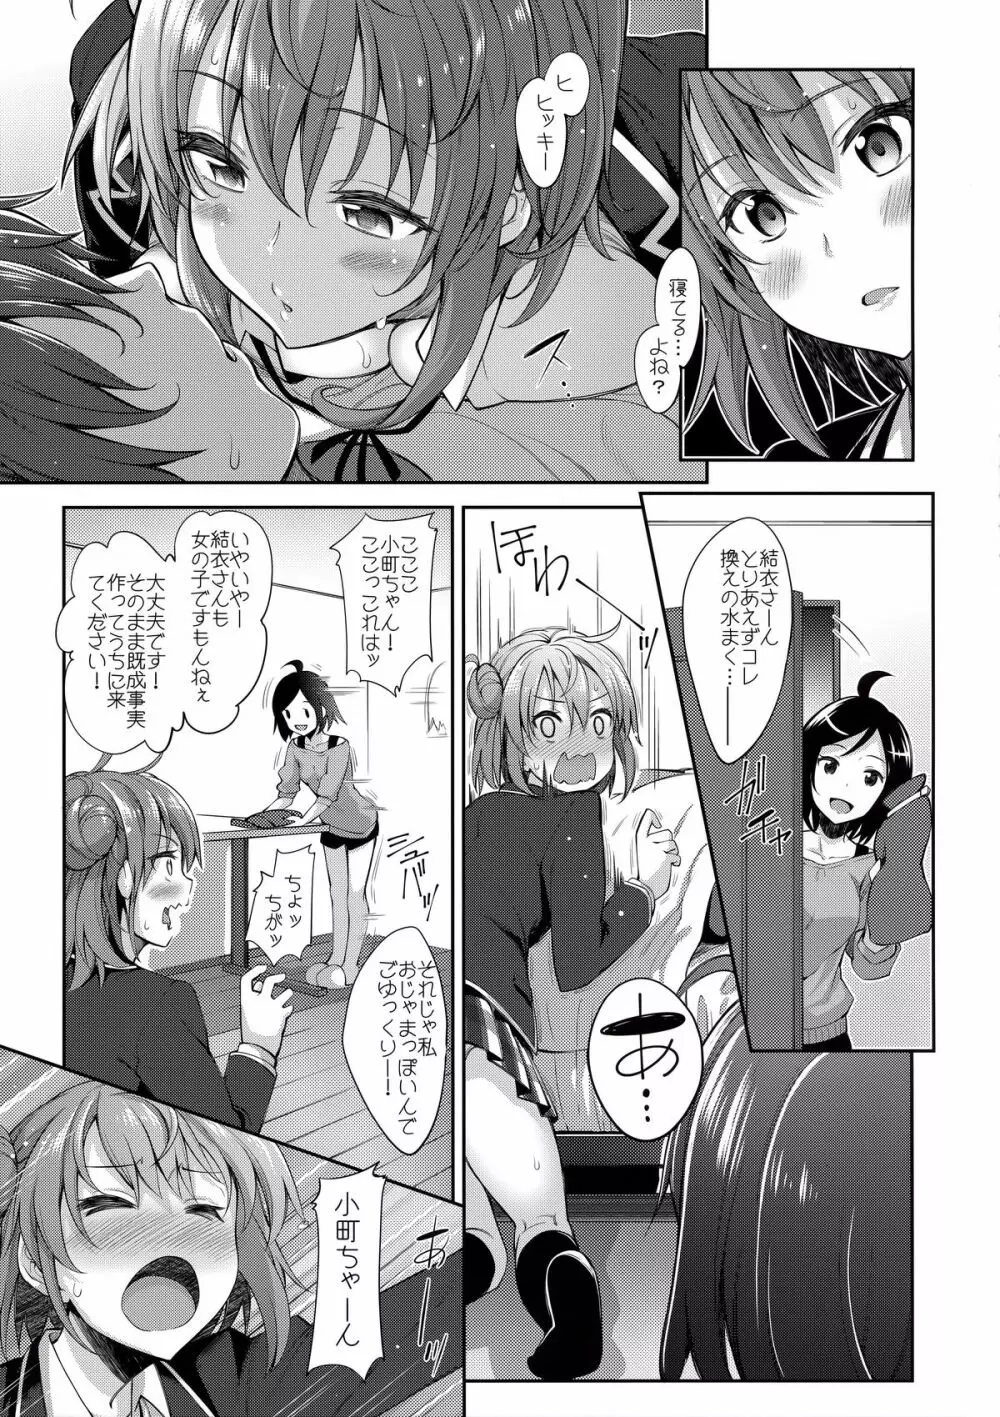 LOVE STORY #02 Page.7